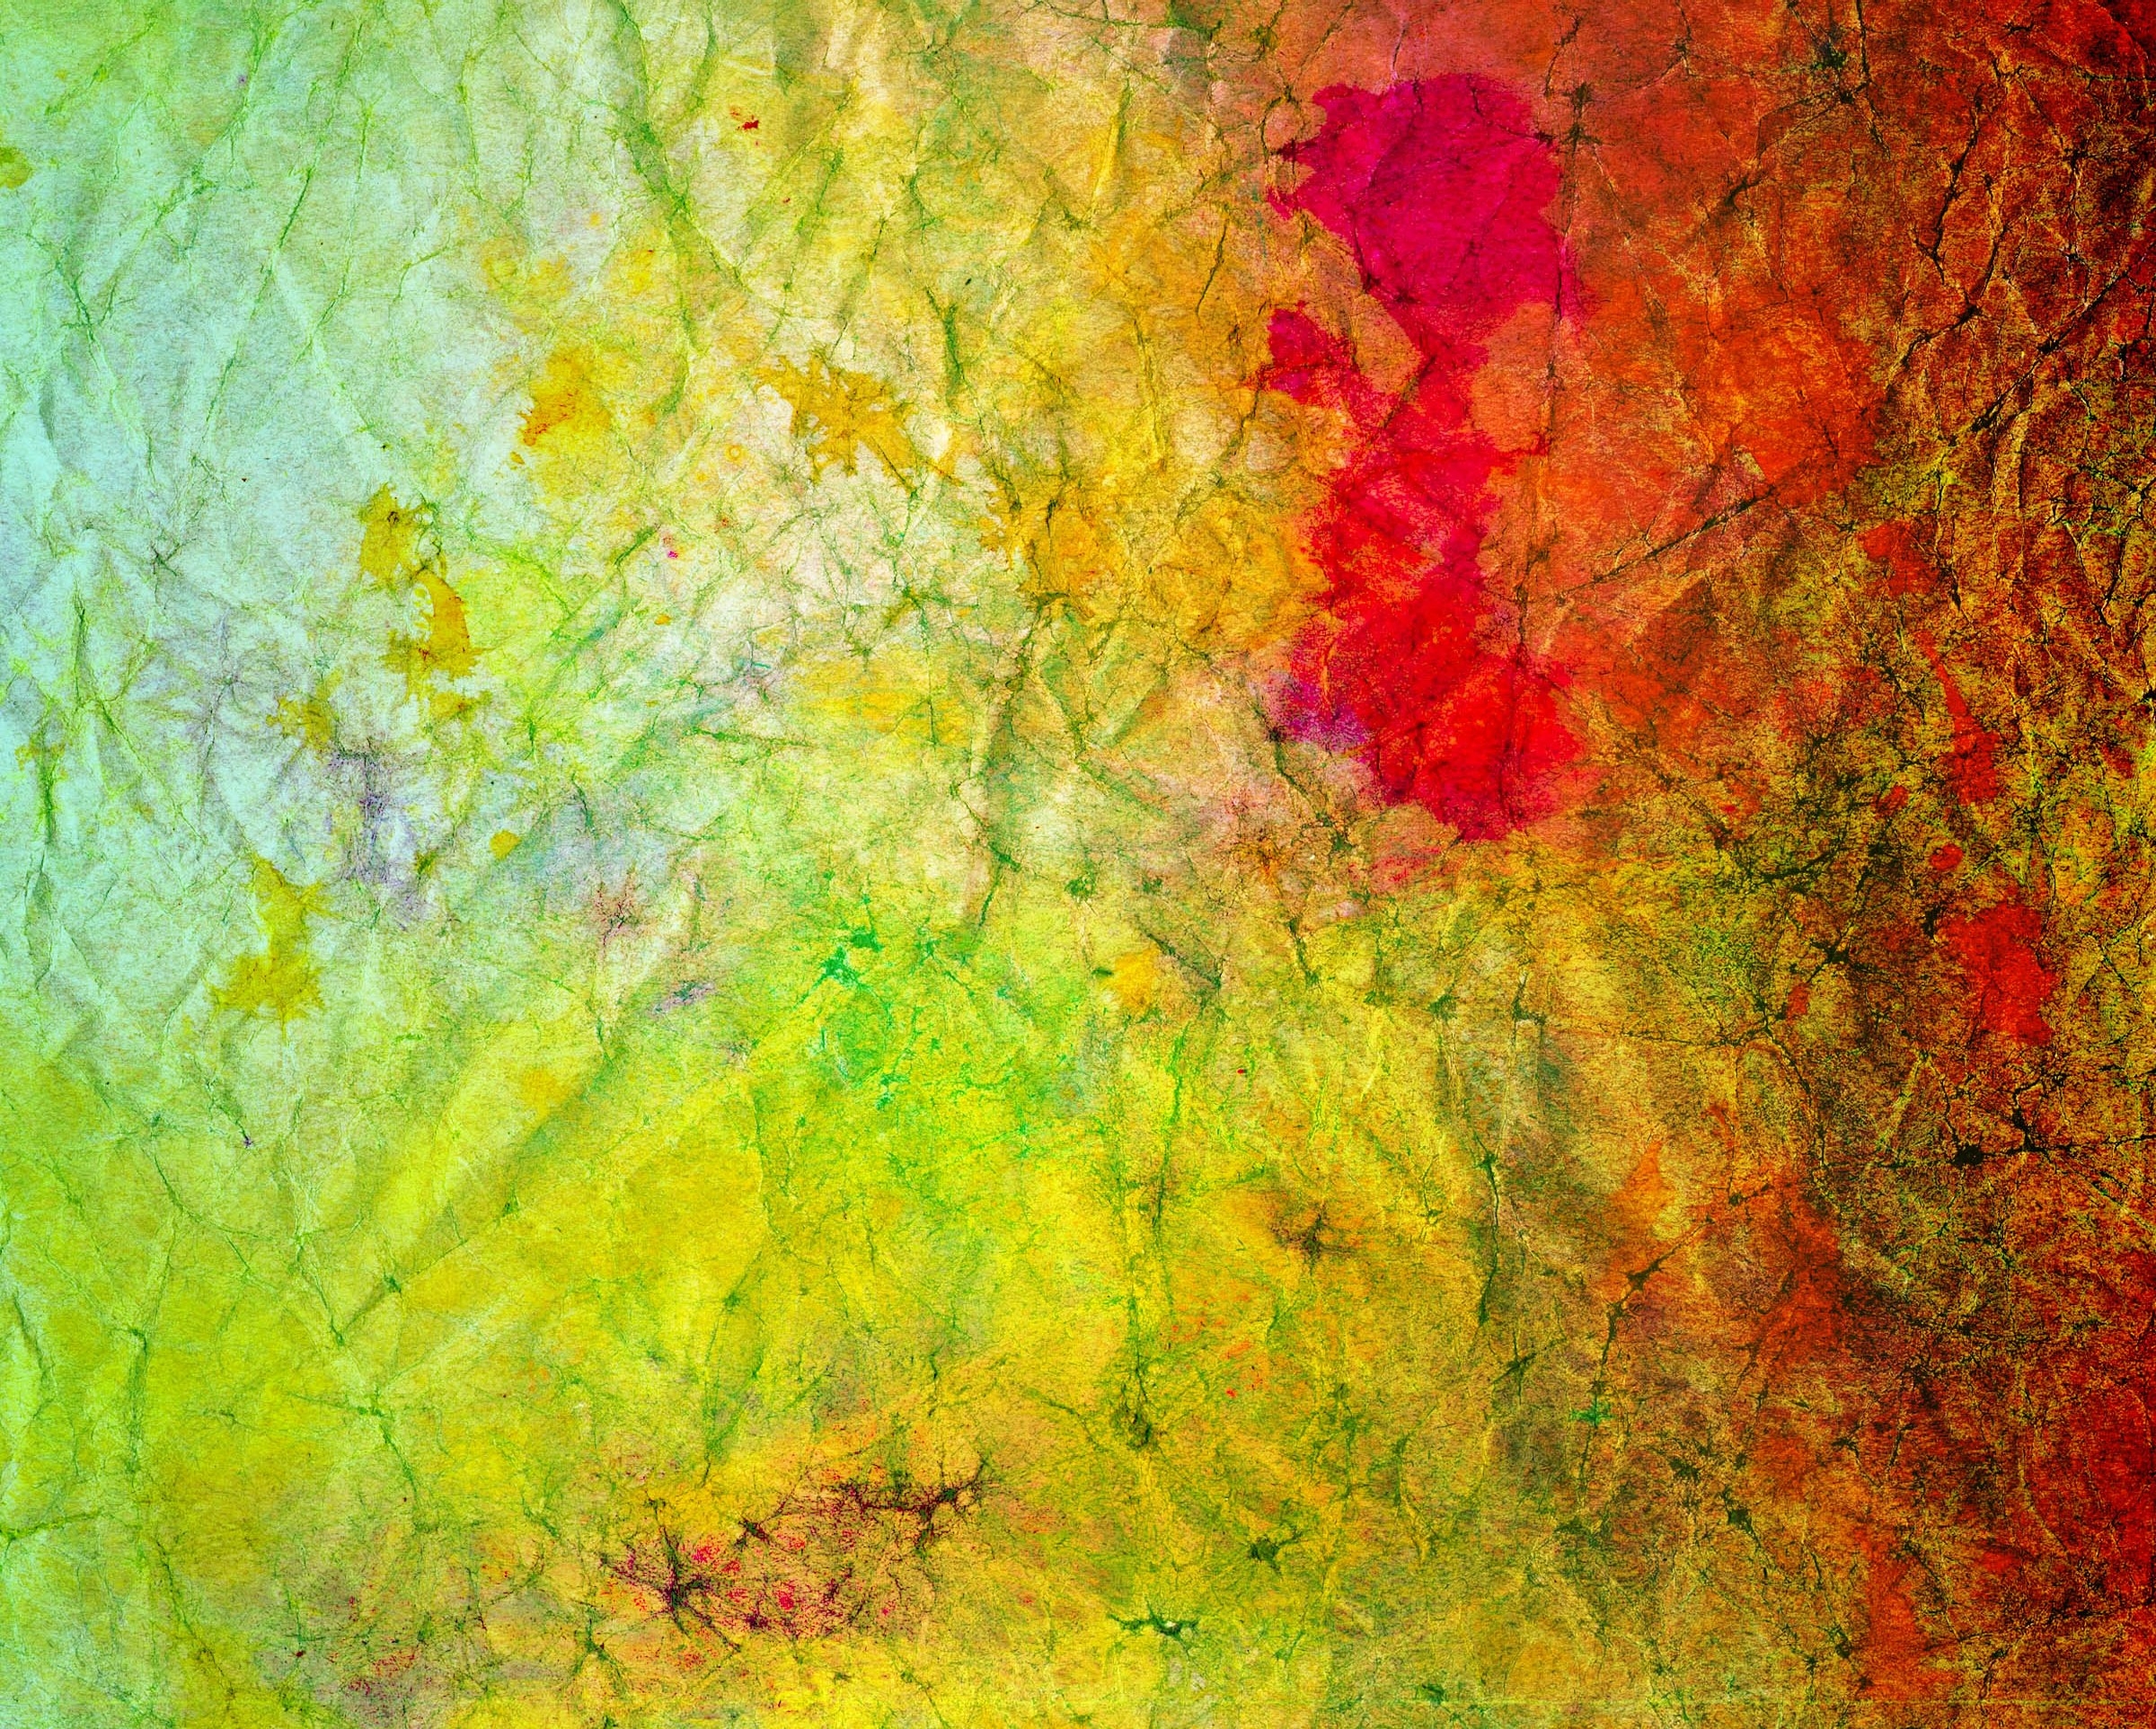 motley, background, multicolored, spotted, spotty, texture, textures